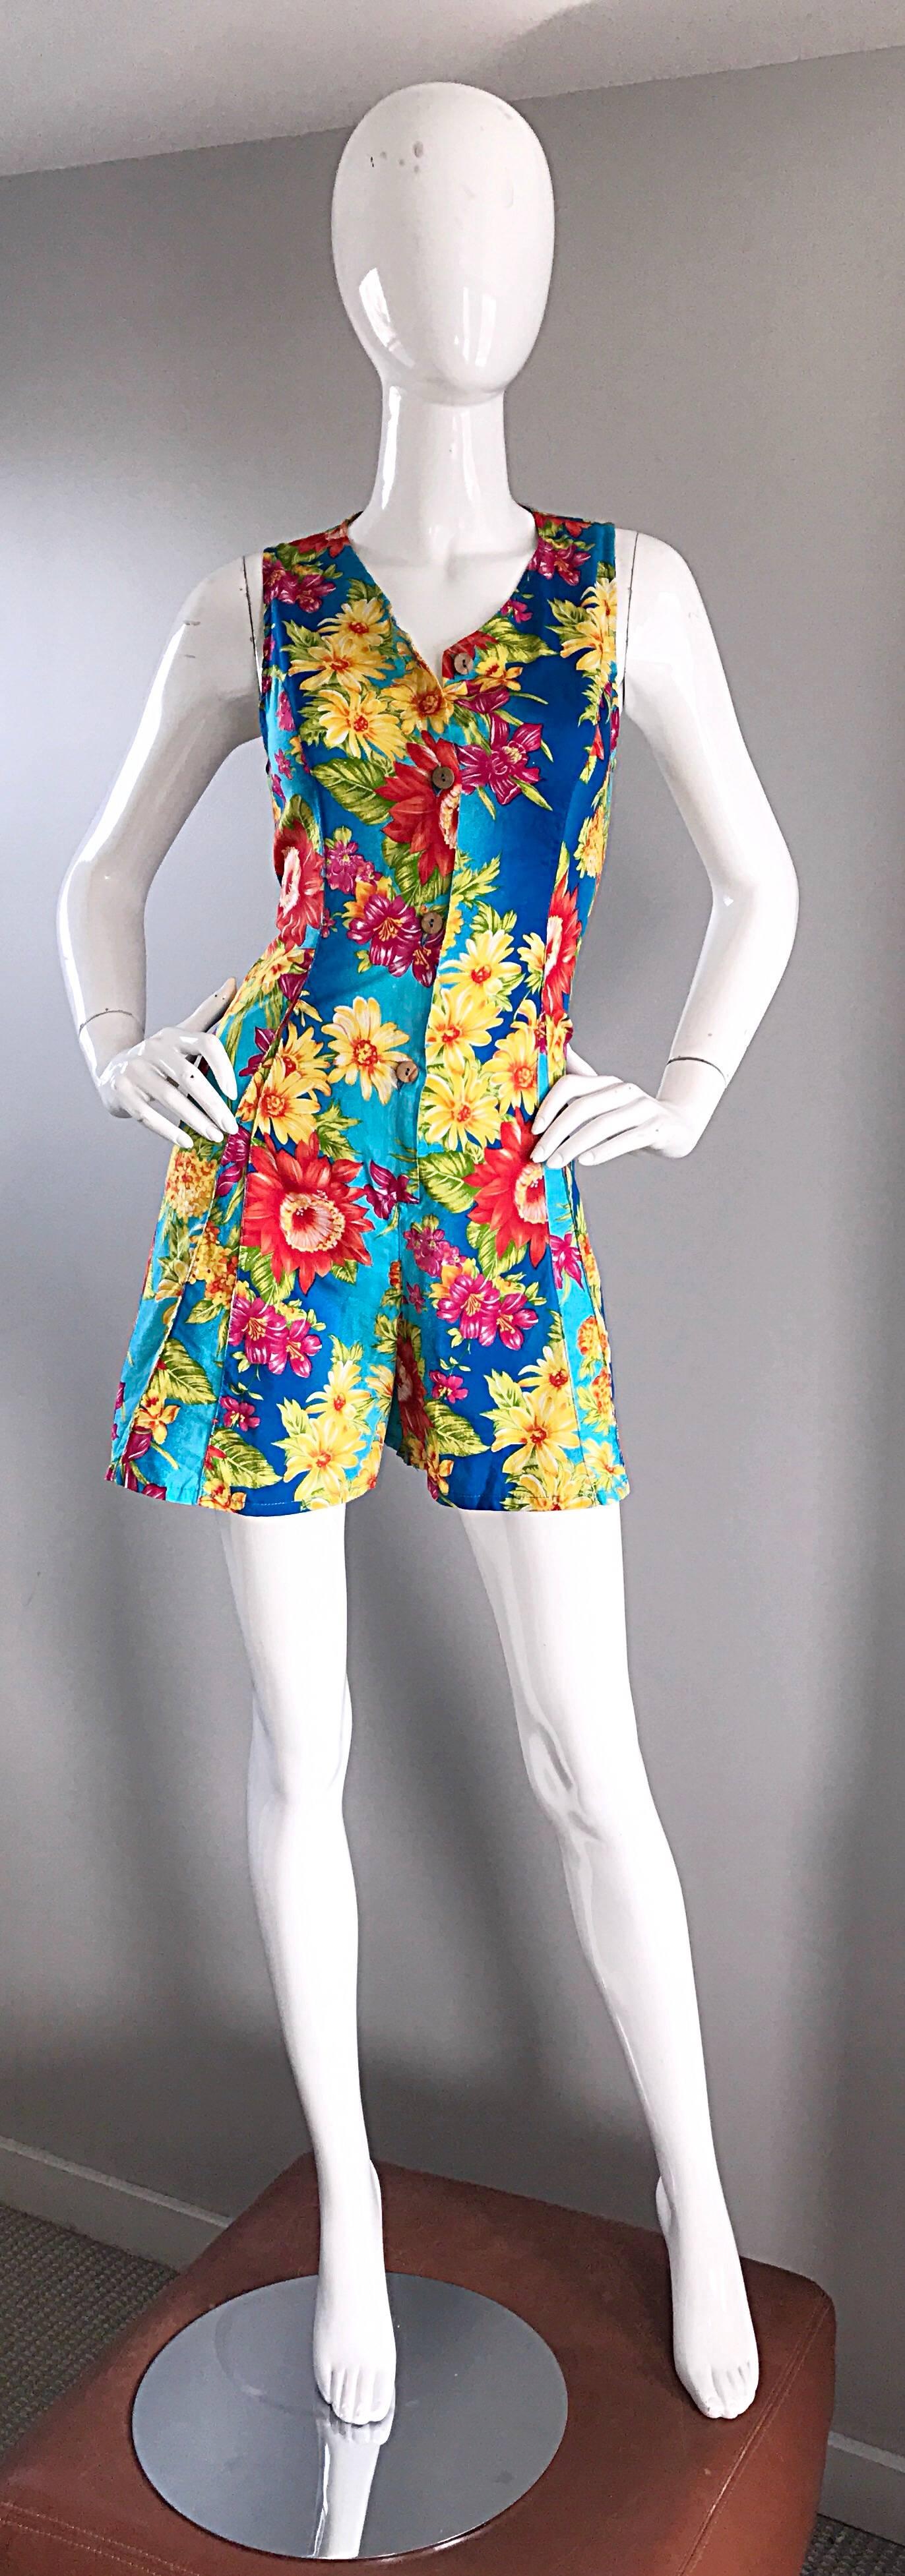 1990s Vintage Italian Hawaiian tropical print onesie romper! Features an amazing vibrant tropical print throughout. Wooden buttons up the front. Flattering fitted bodice, with slightly wide legs. So chic, and on point! No fabric label, but feels